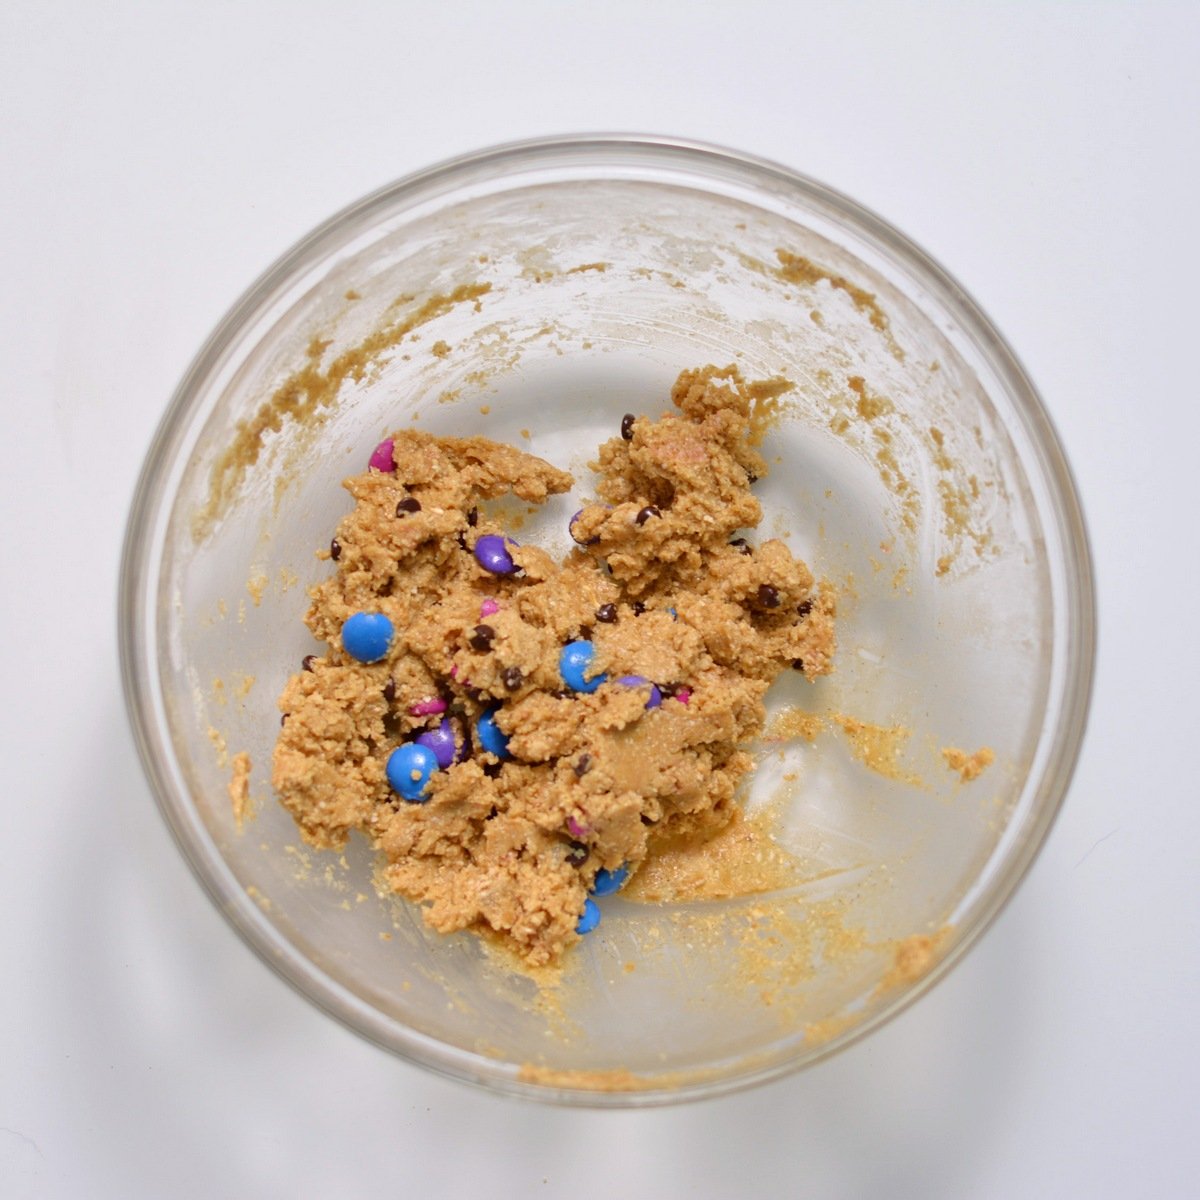 A bowl with the cookie mixture in it.